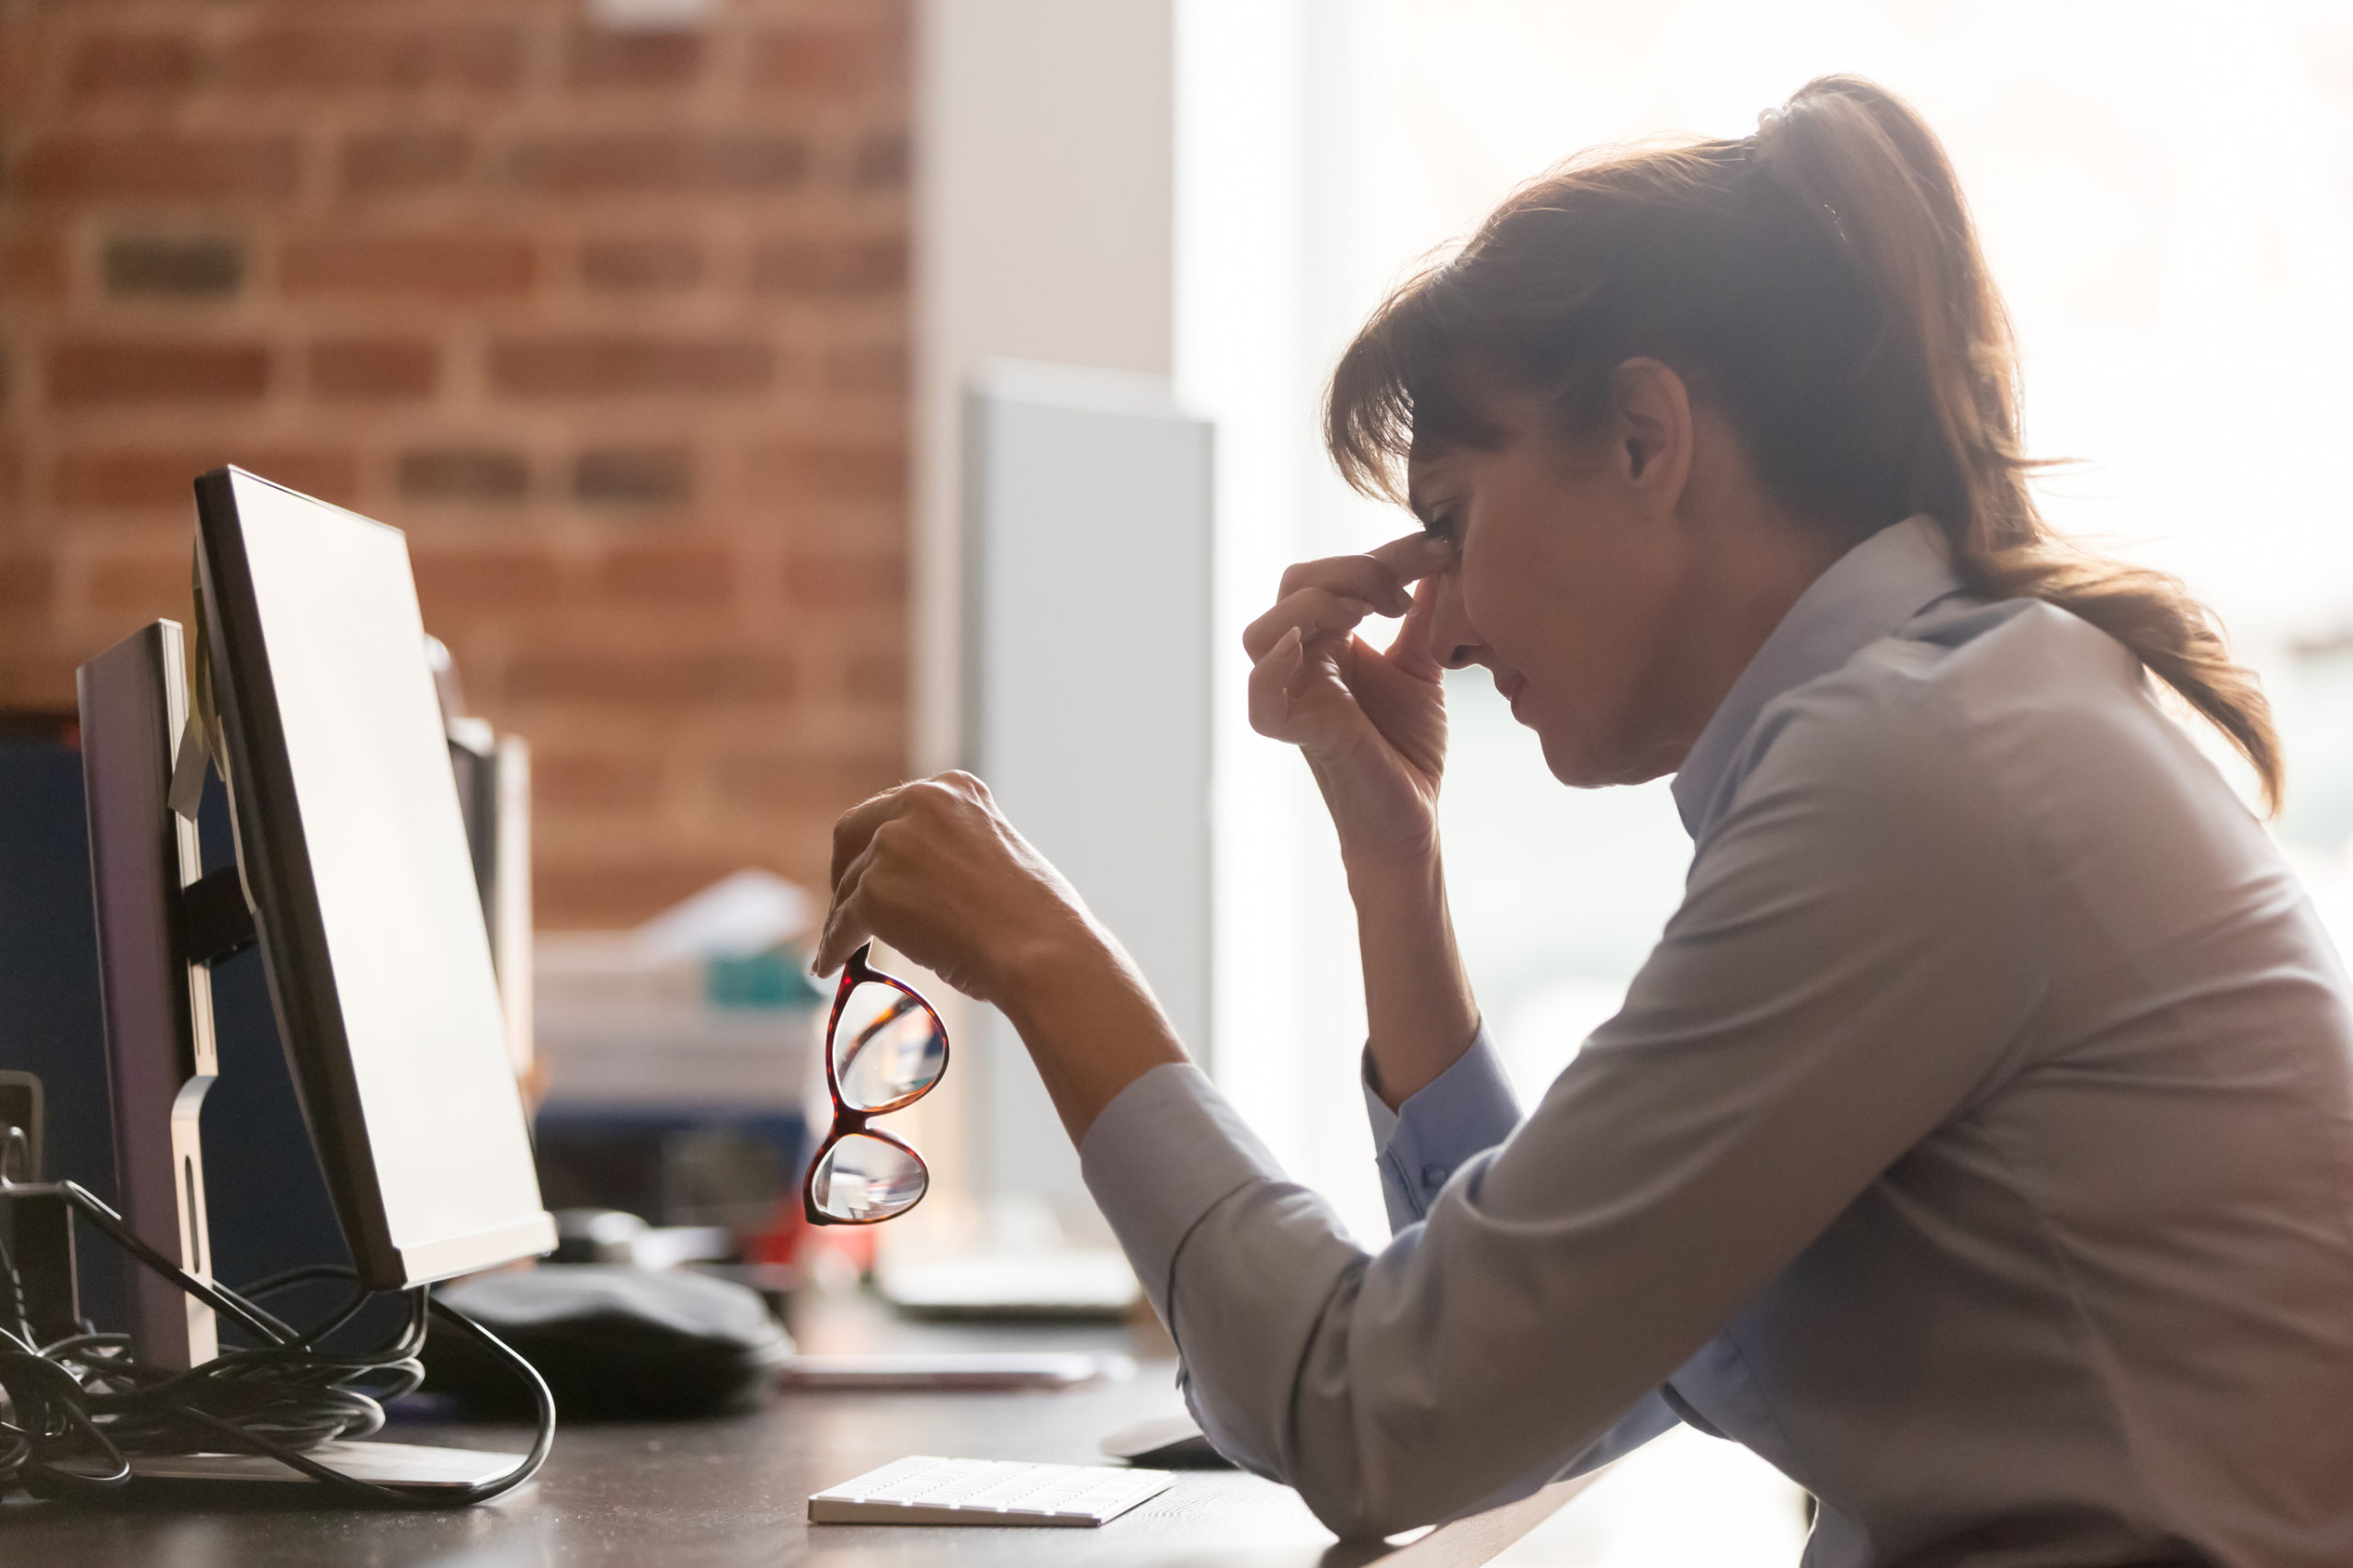 stressed middle aged woman taking off glasses at work rubbing eyes